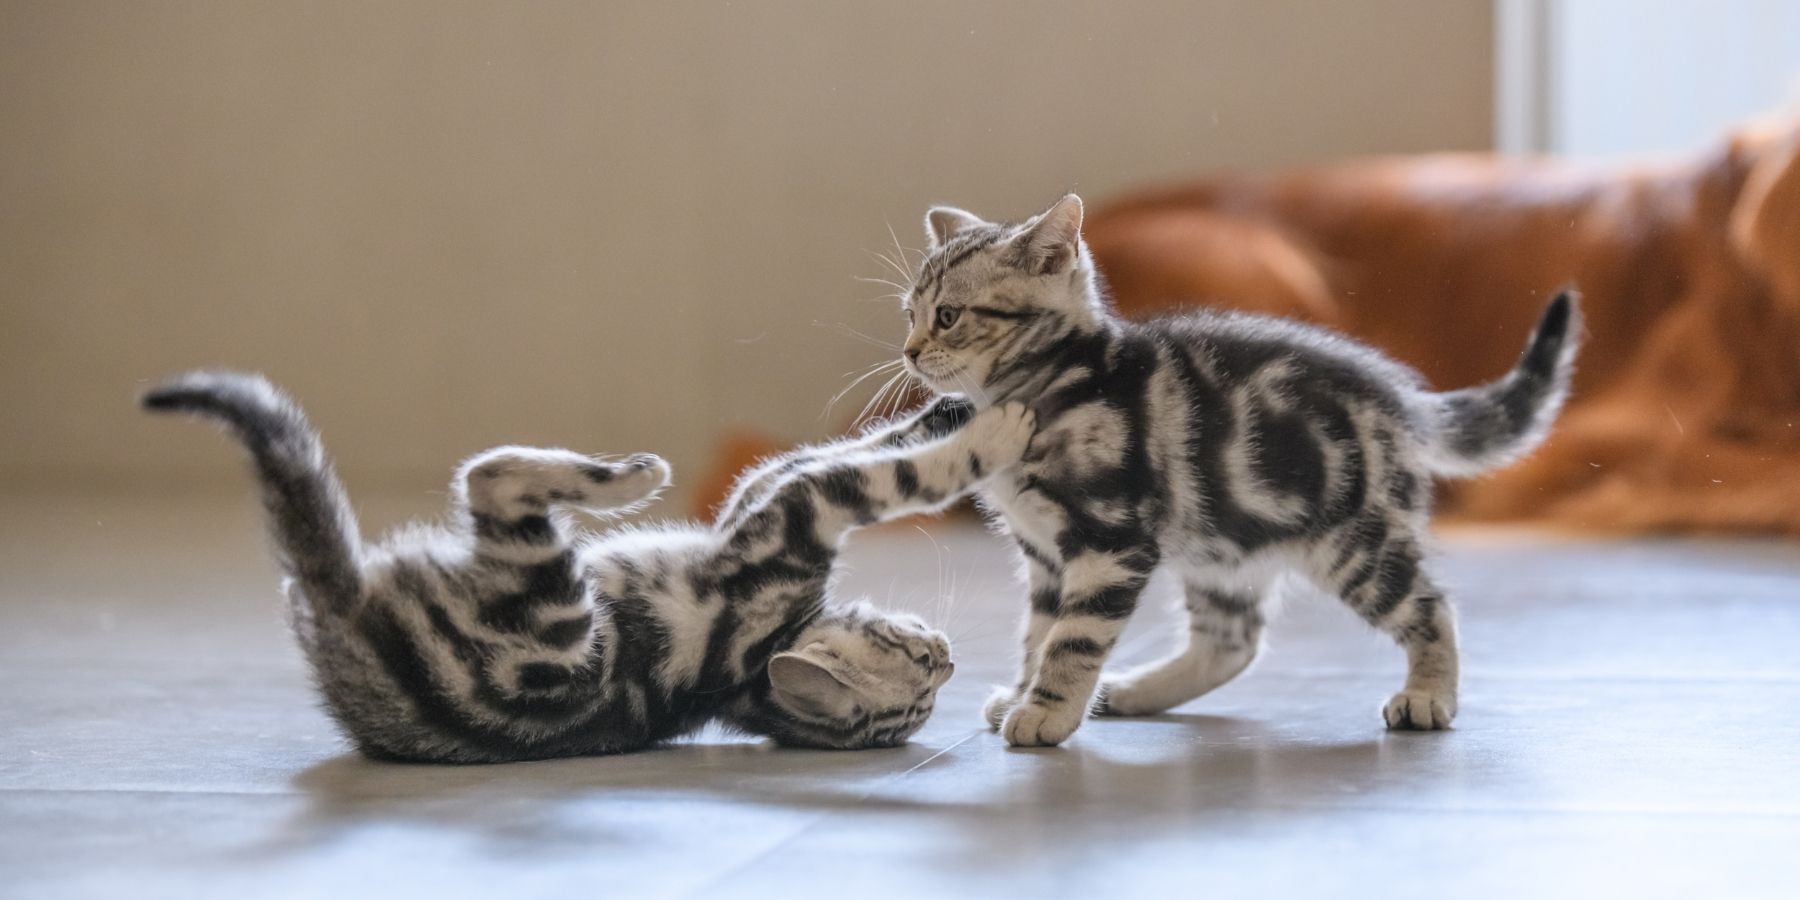 When to Step In During Your Cats' Playtime Tussles